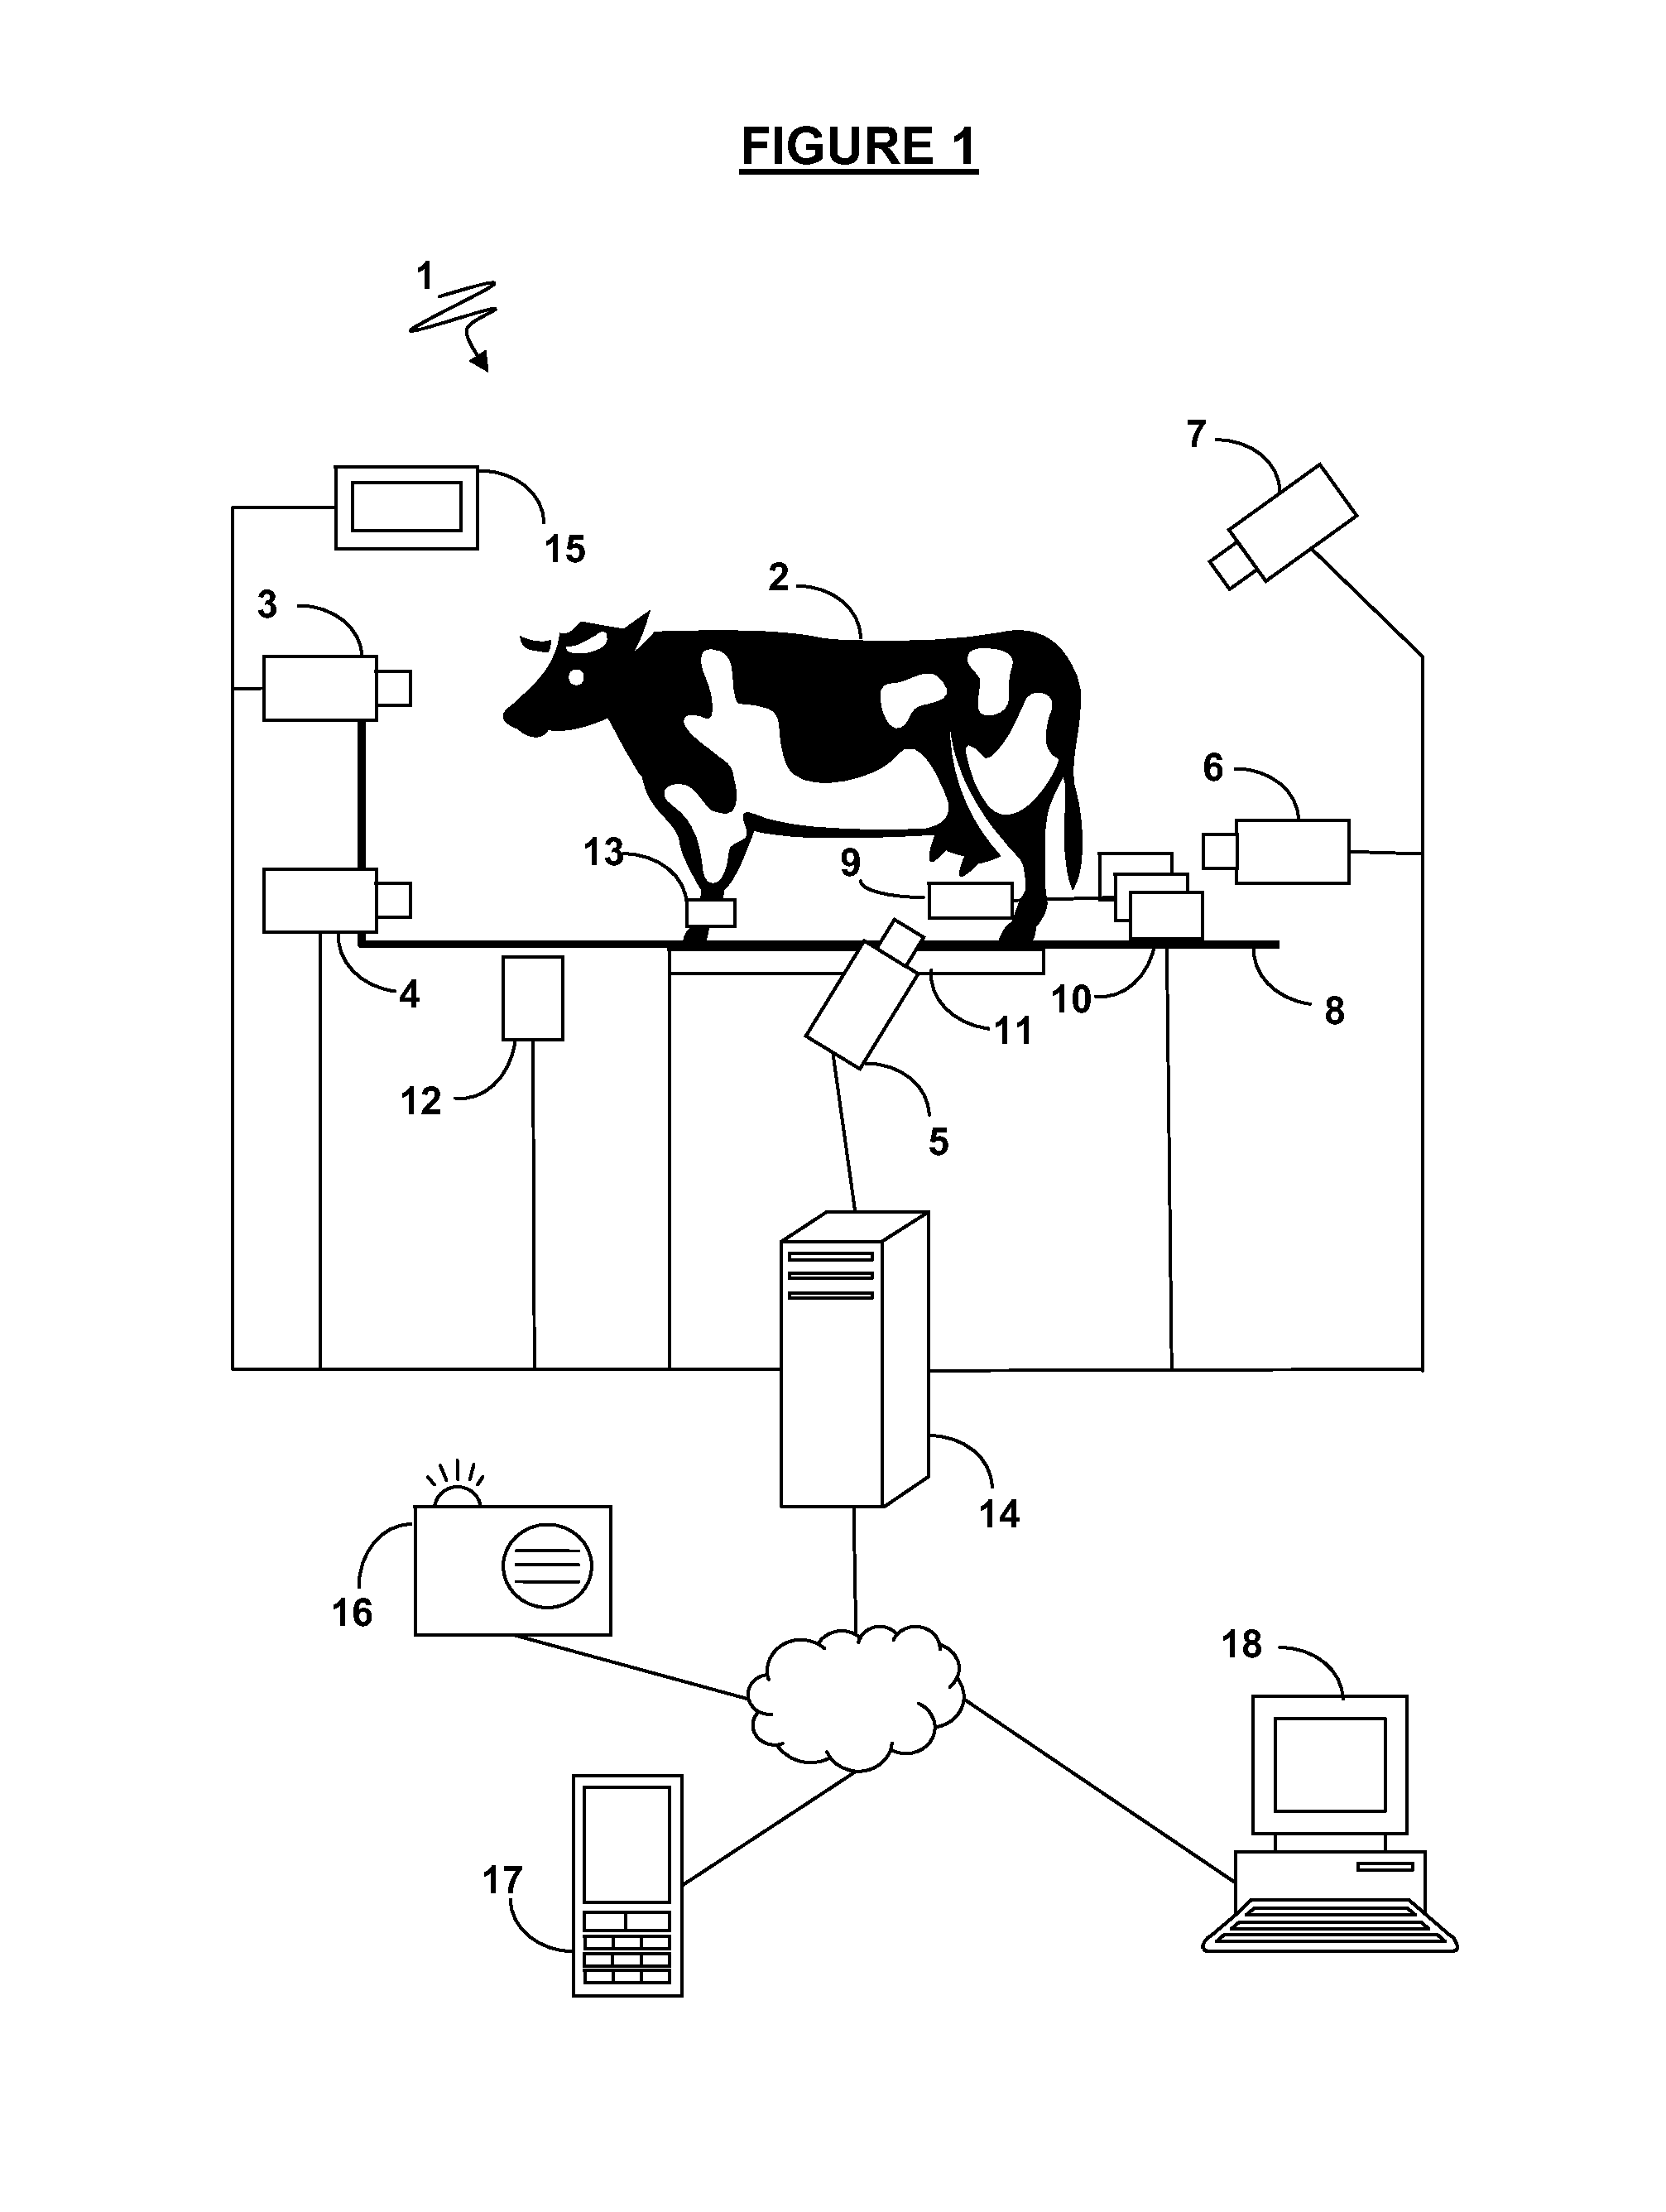 Detection apparatus for the monitoring of milking animals